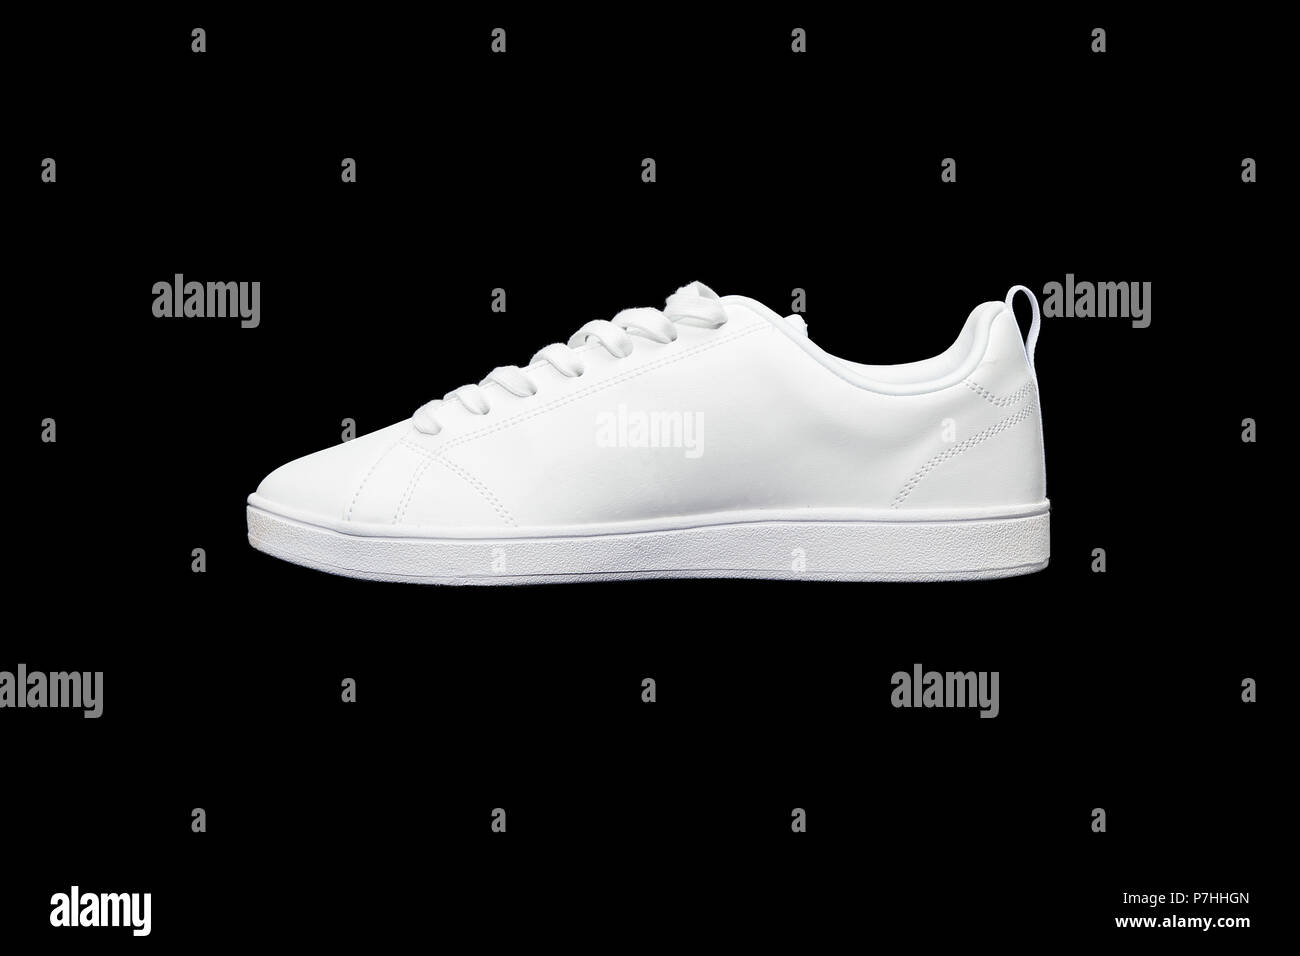 White Sneakers Stock Photos & White Sneakers Stock Images - Alamy